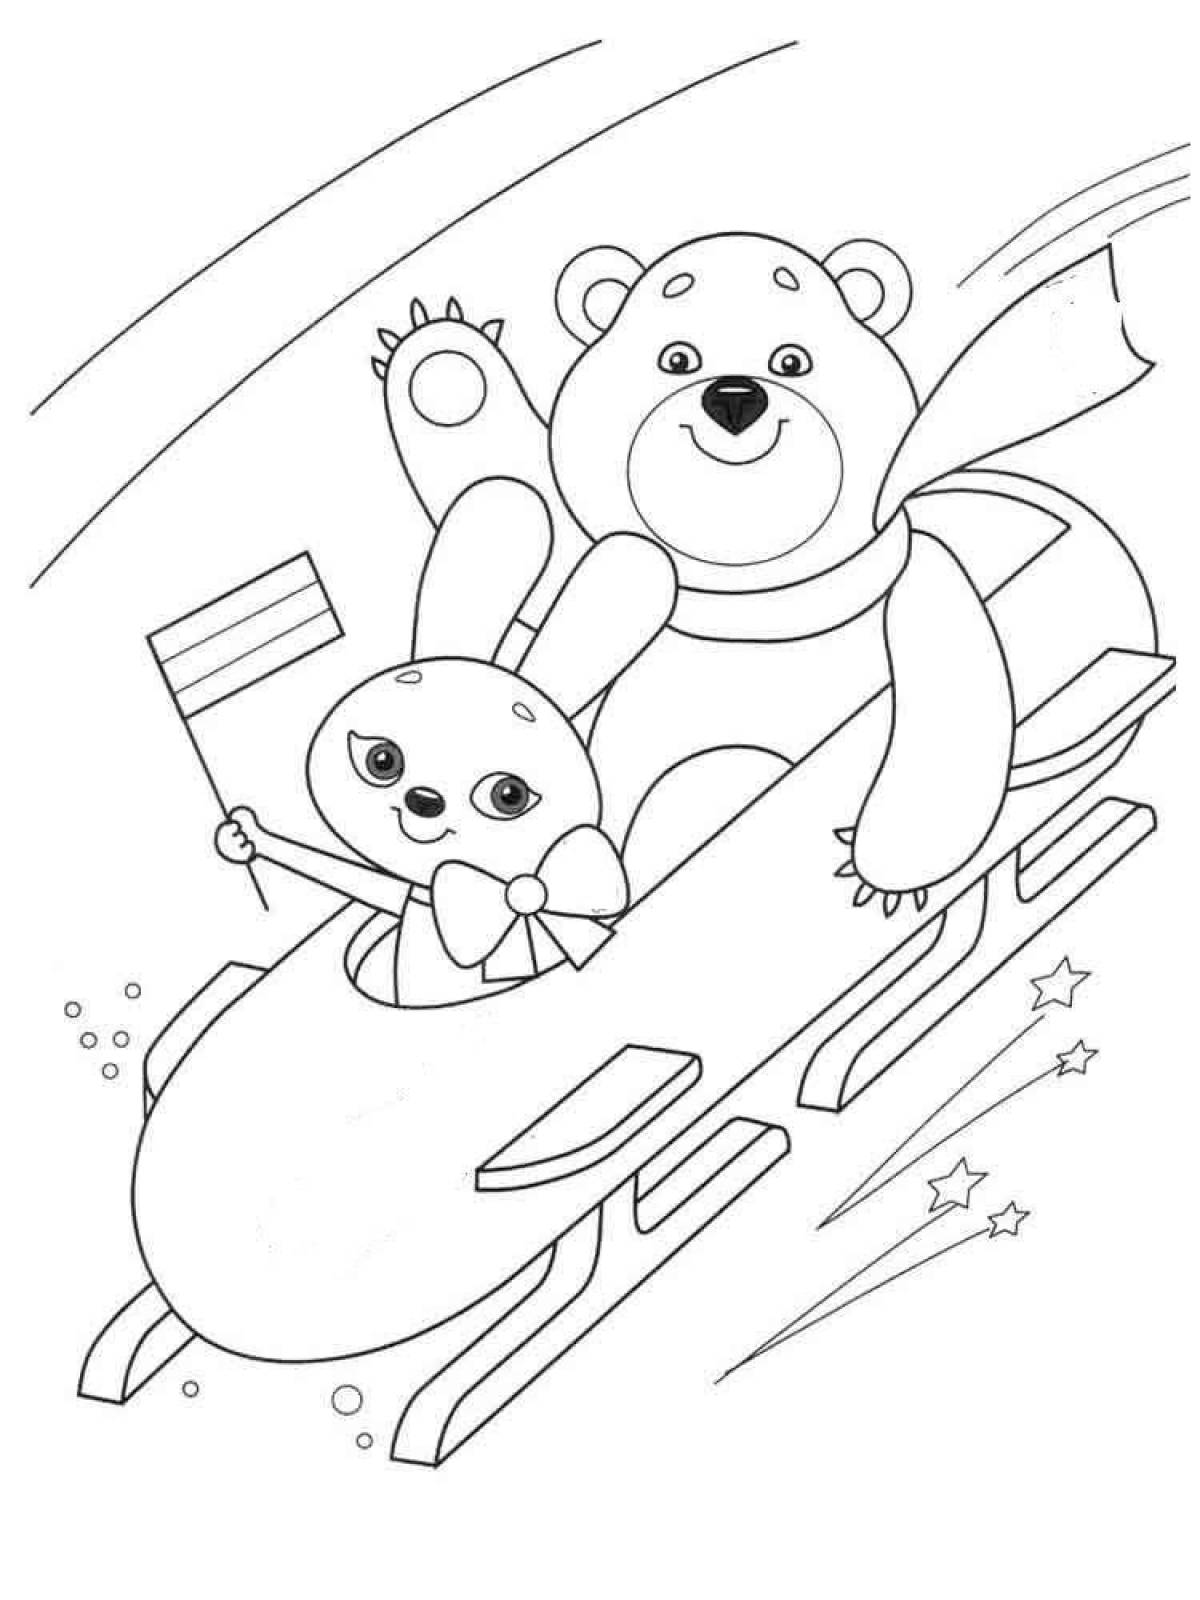 Shining coloring book for children 3-4 years old winter sports